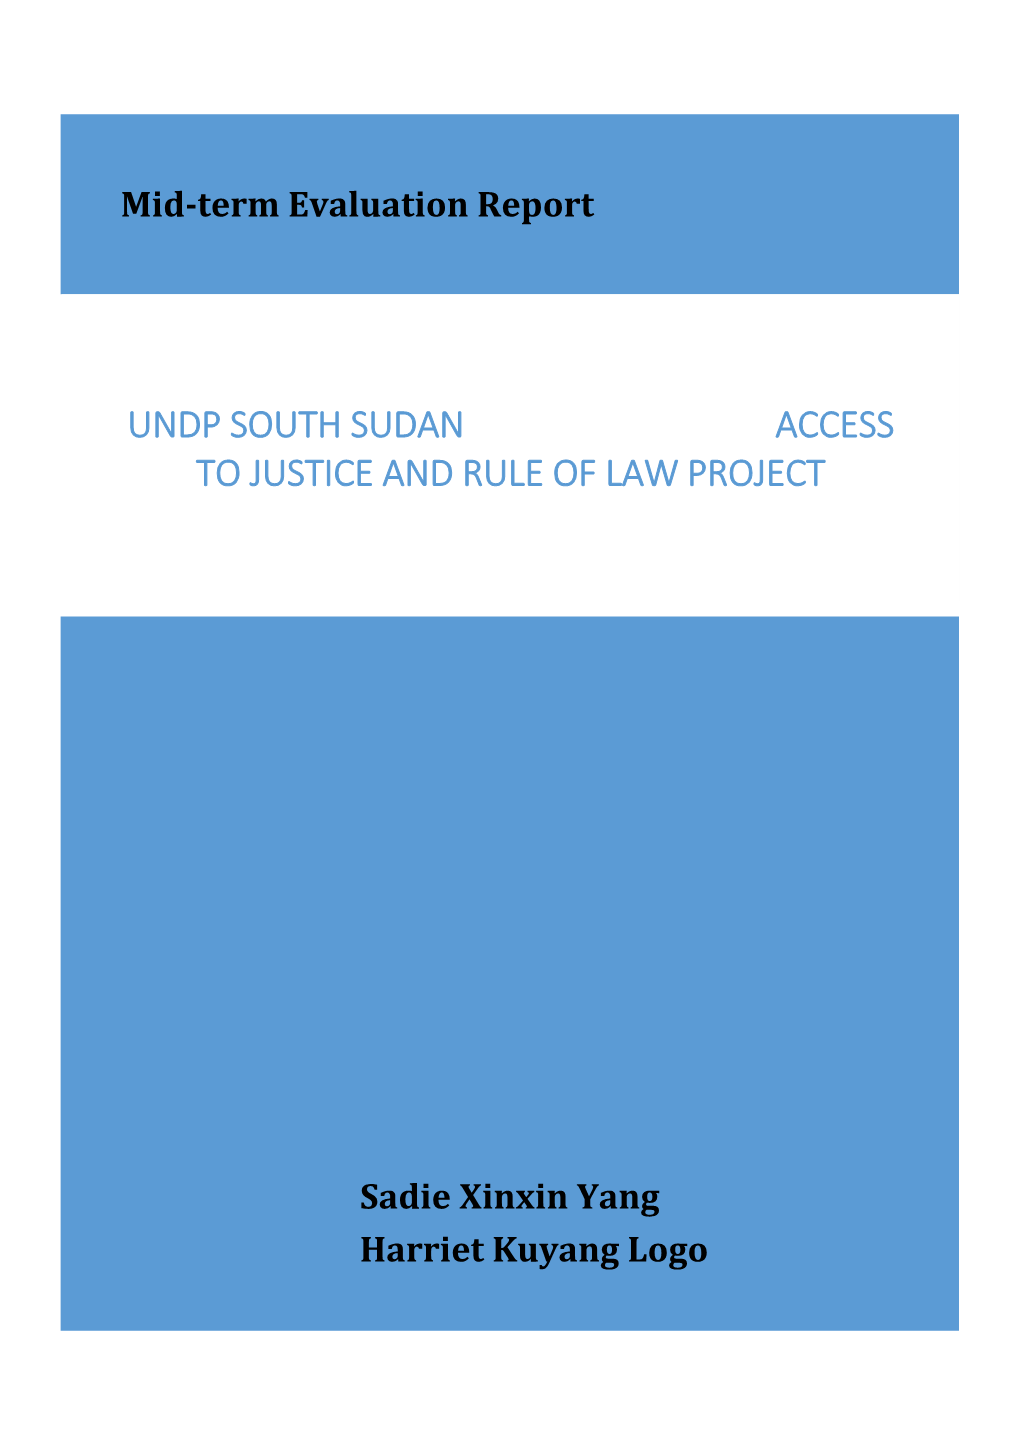 Access to Justice and Rule of Law Project